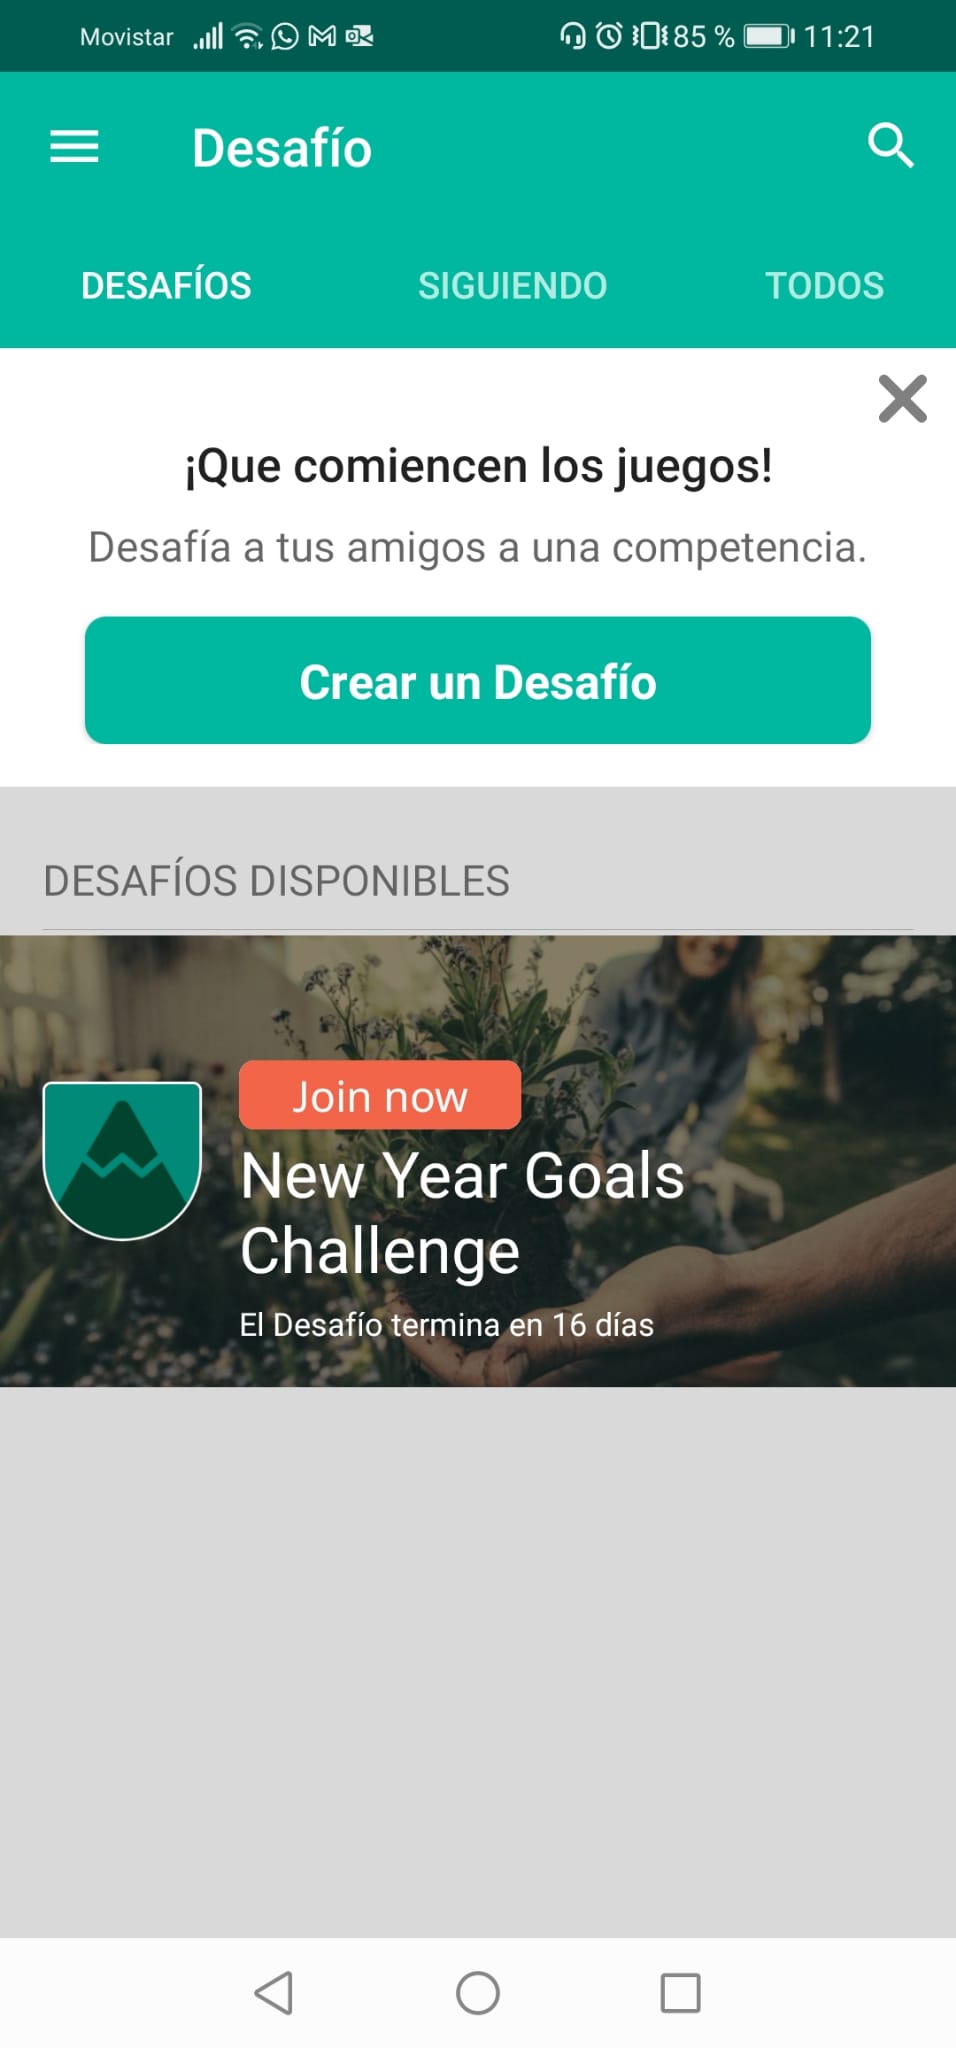 The challenges available in the app are displayed.